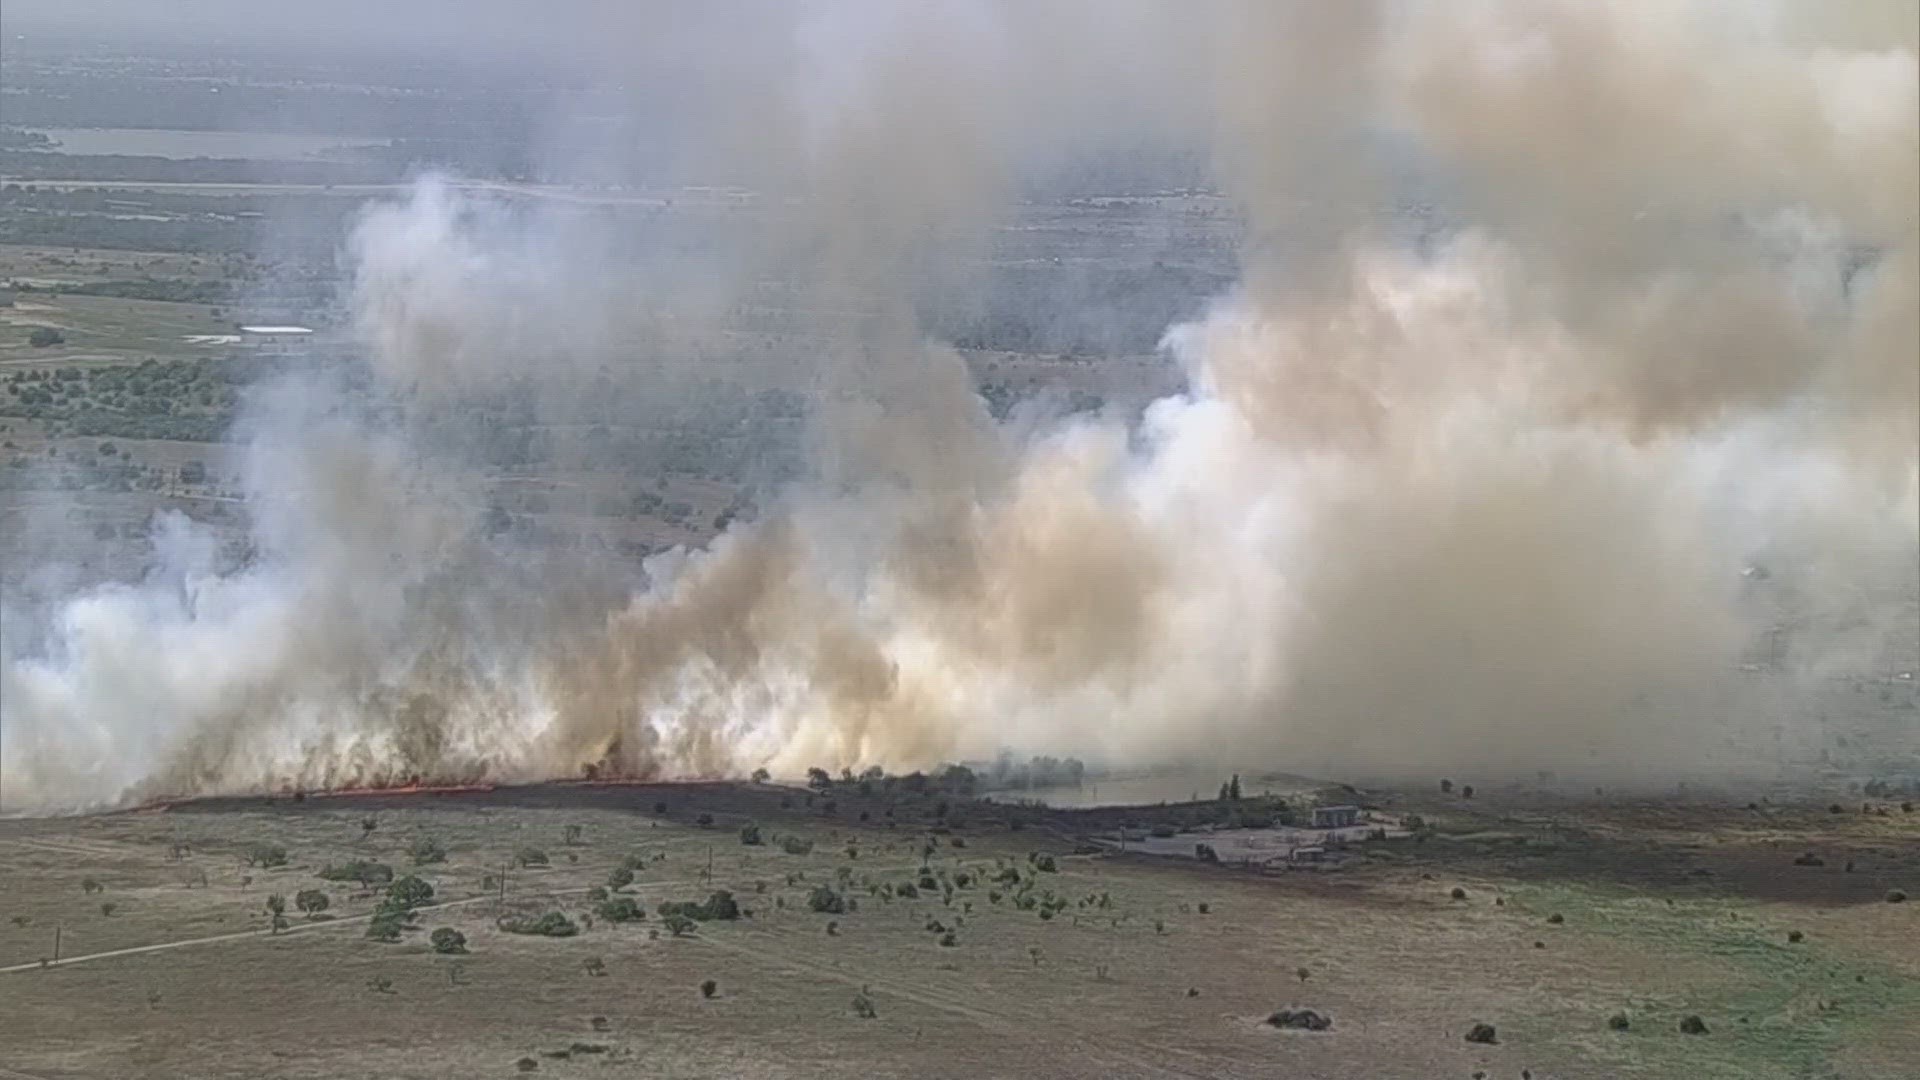 The fire happened near Fort Worth and Saginaw and produced large, thick smoke in the area.